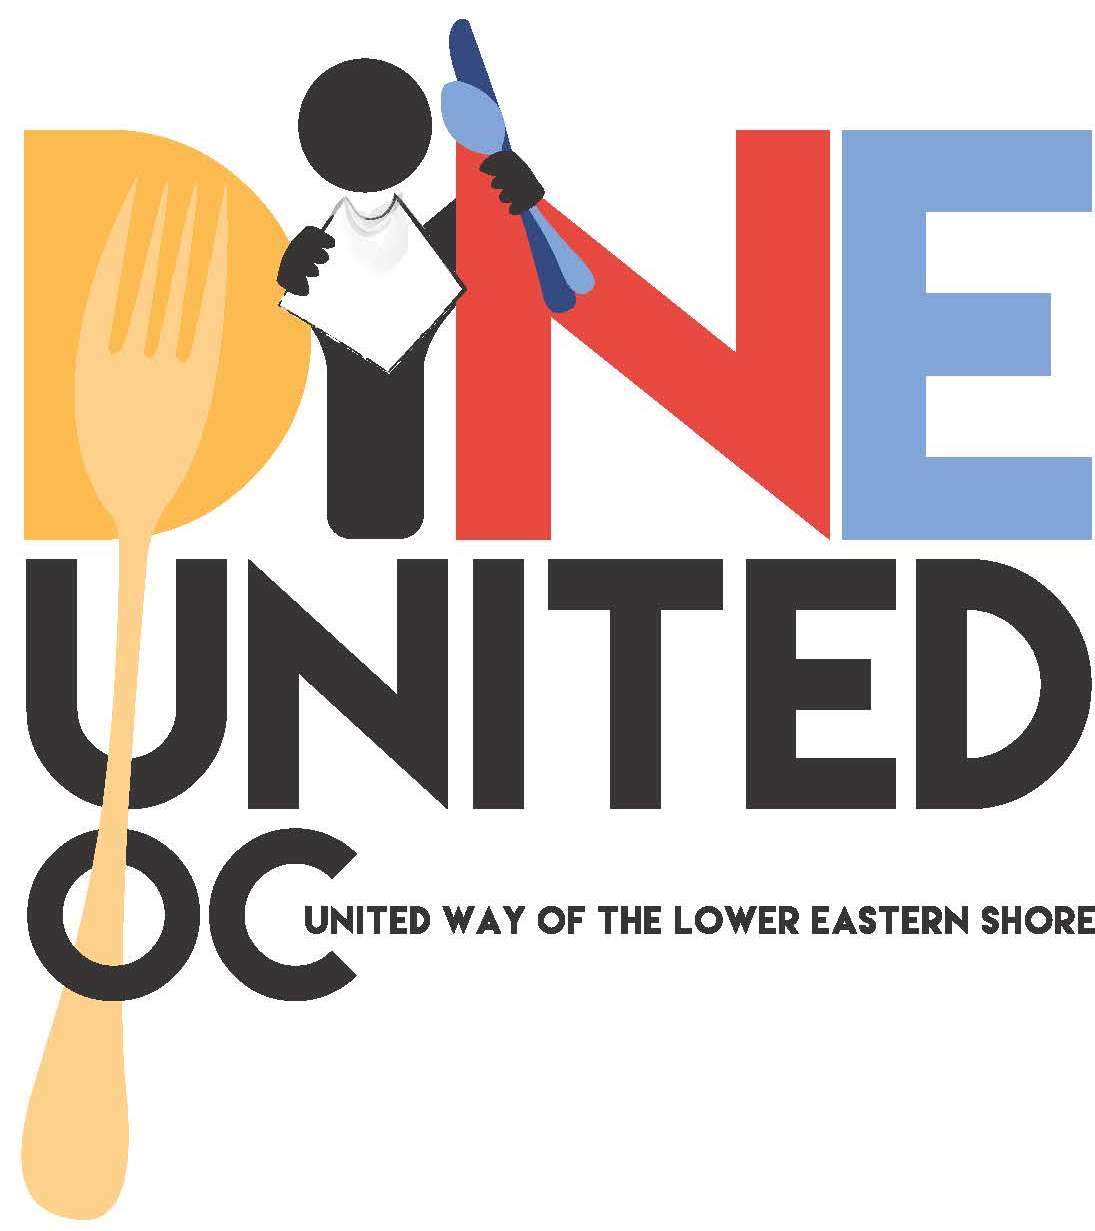 06/01/2016 Dine United OC Campaign Kicks Off This Month News Ocean